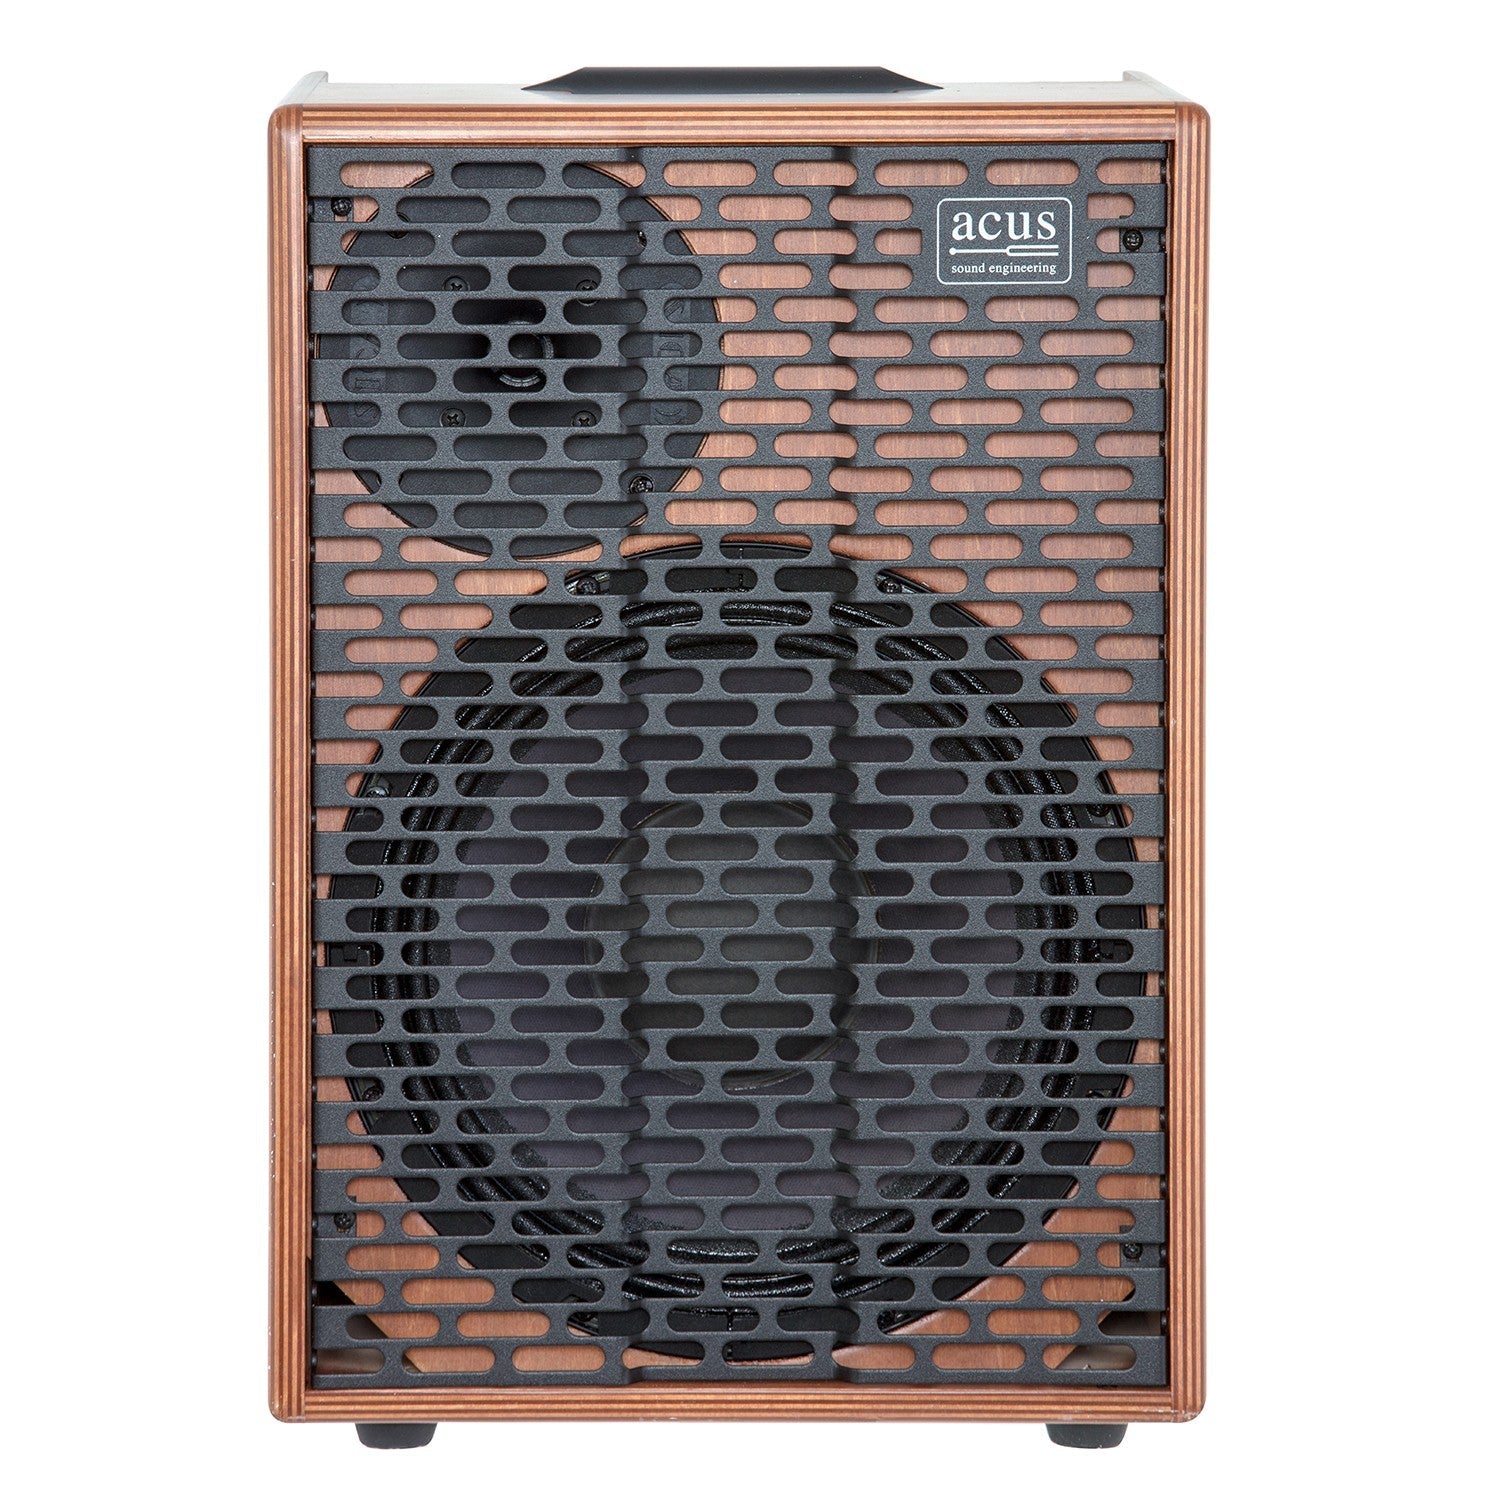 Amplifier Acus One Forstreet 10, Combo - Việt Music